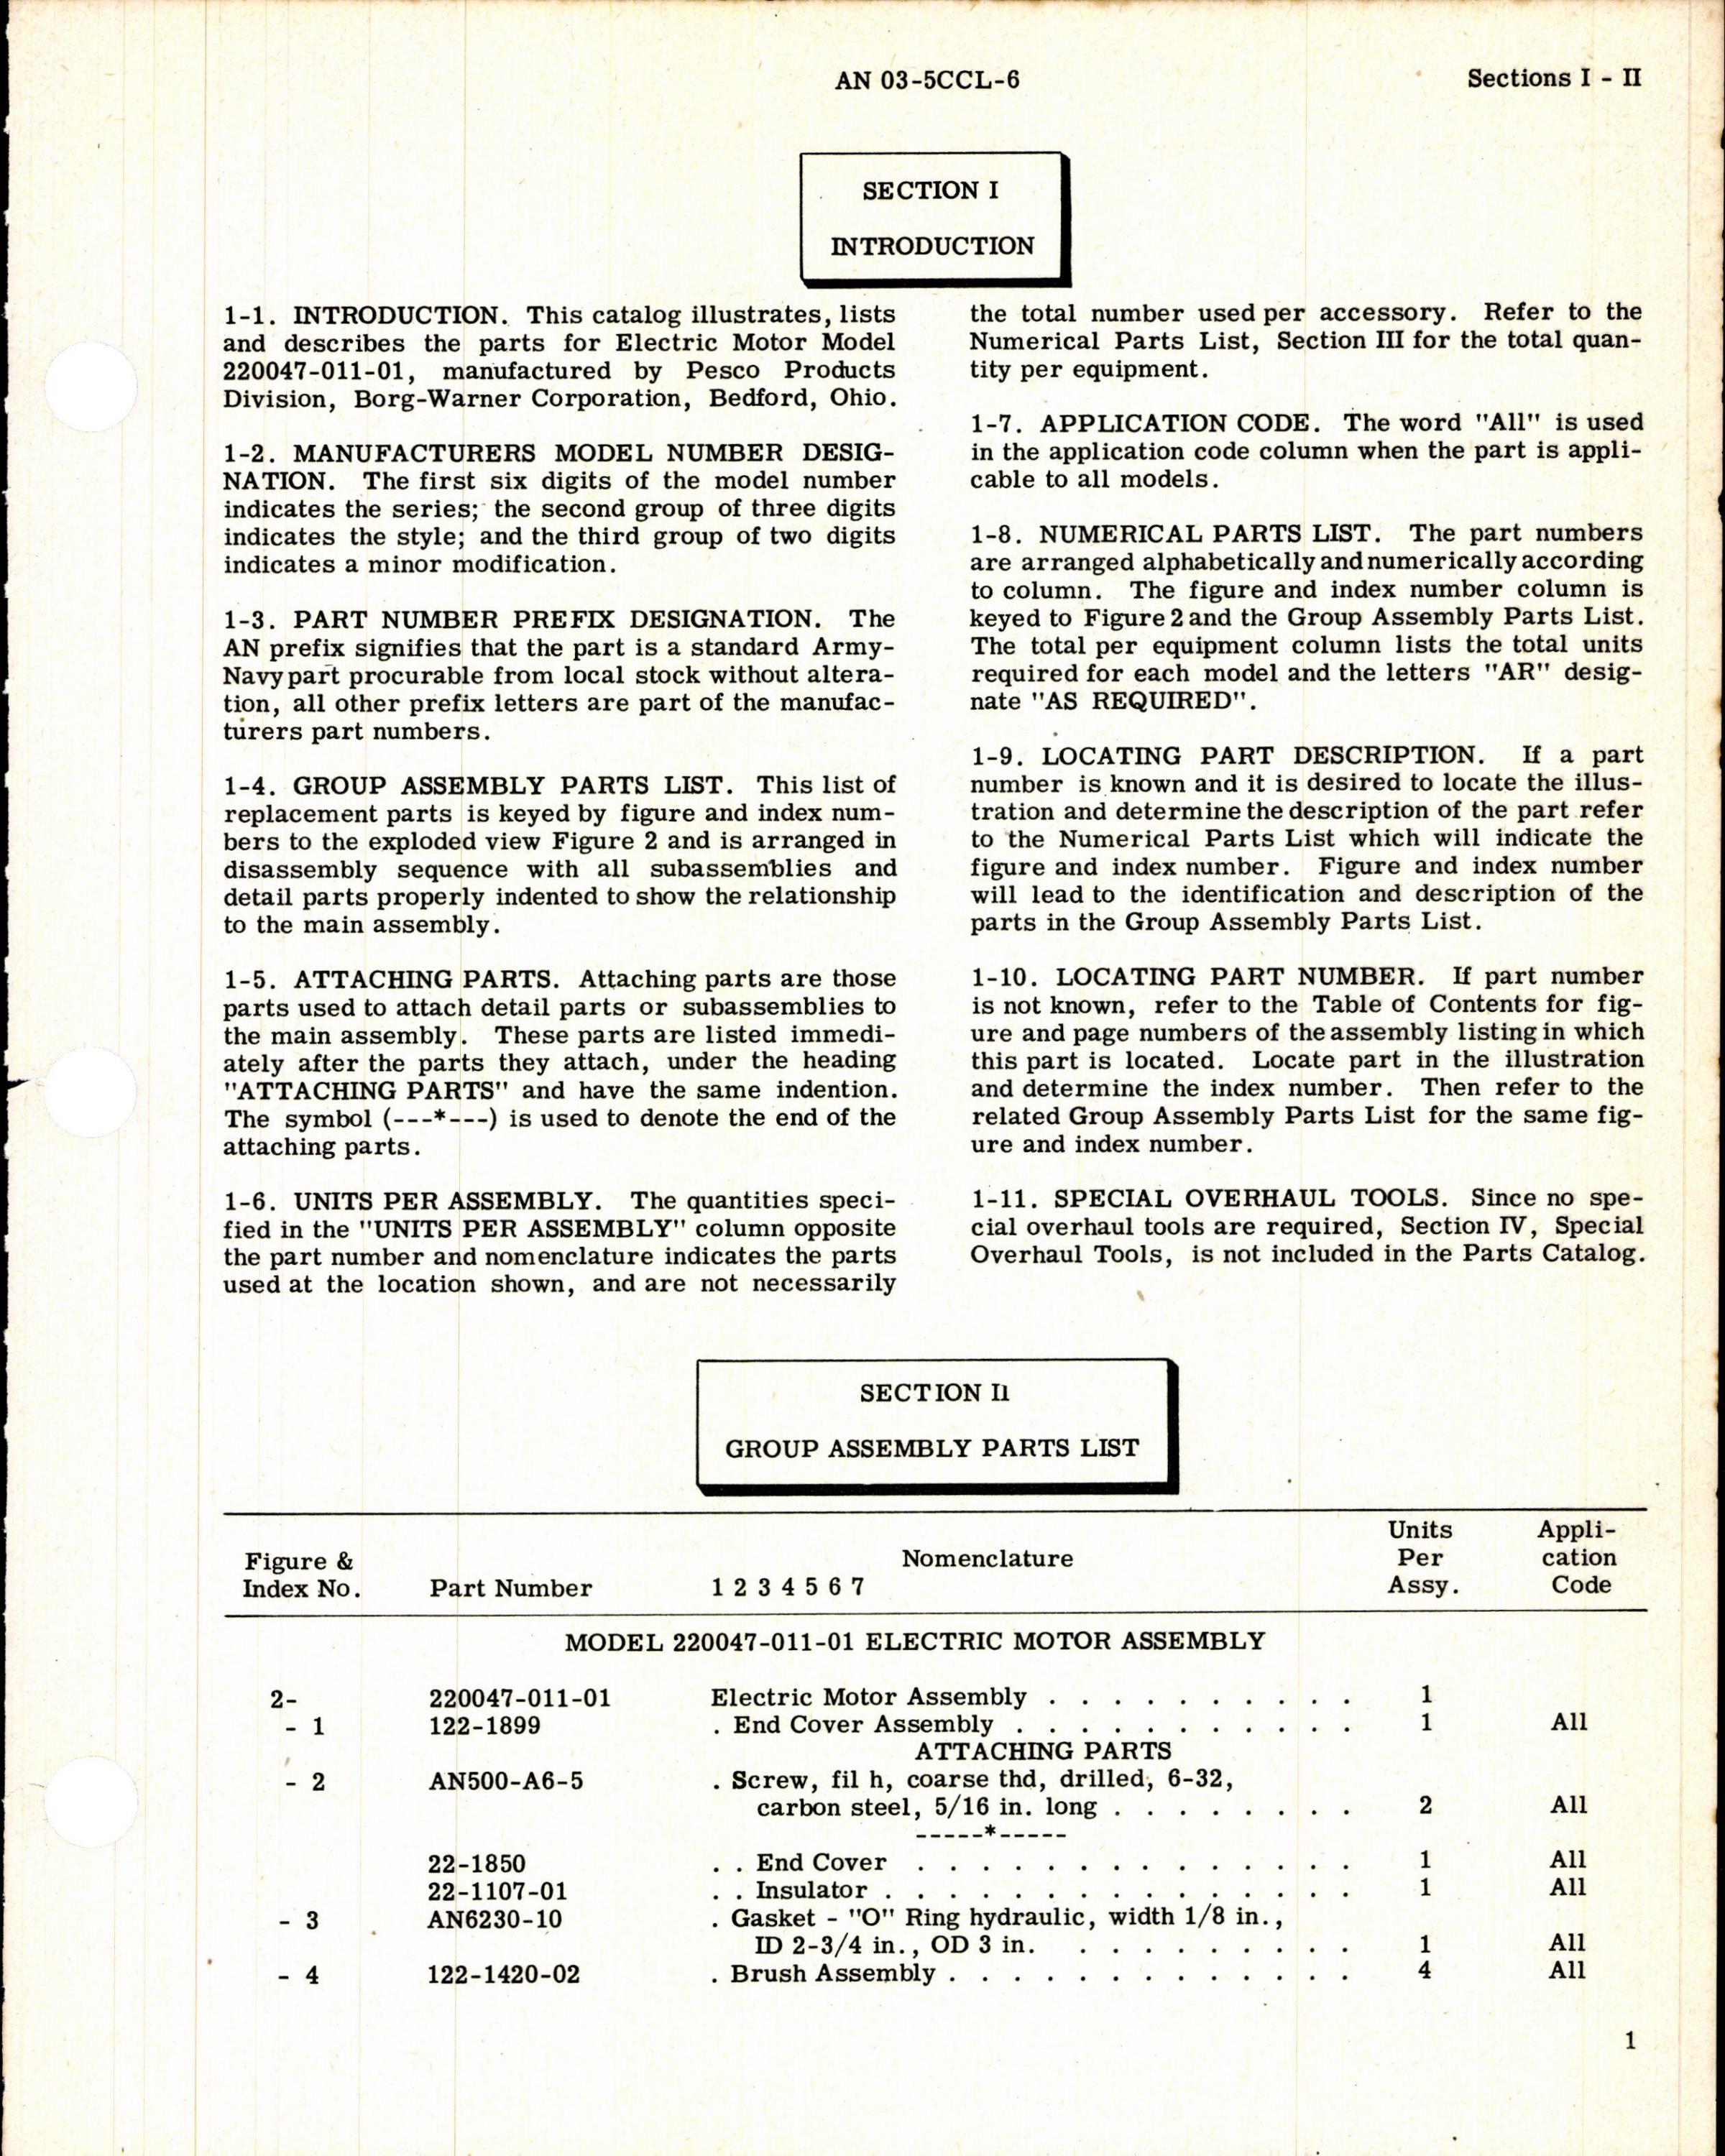 Sample page 5 from AirCorps Library document: Parts Catalog for Pesco Electric Motors, Model 220047-011-01